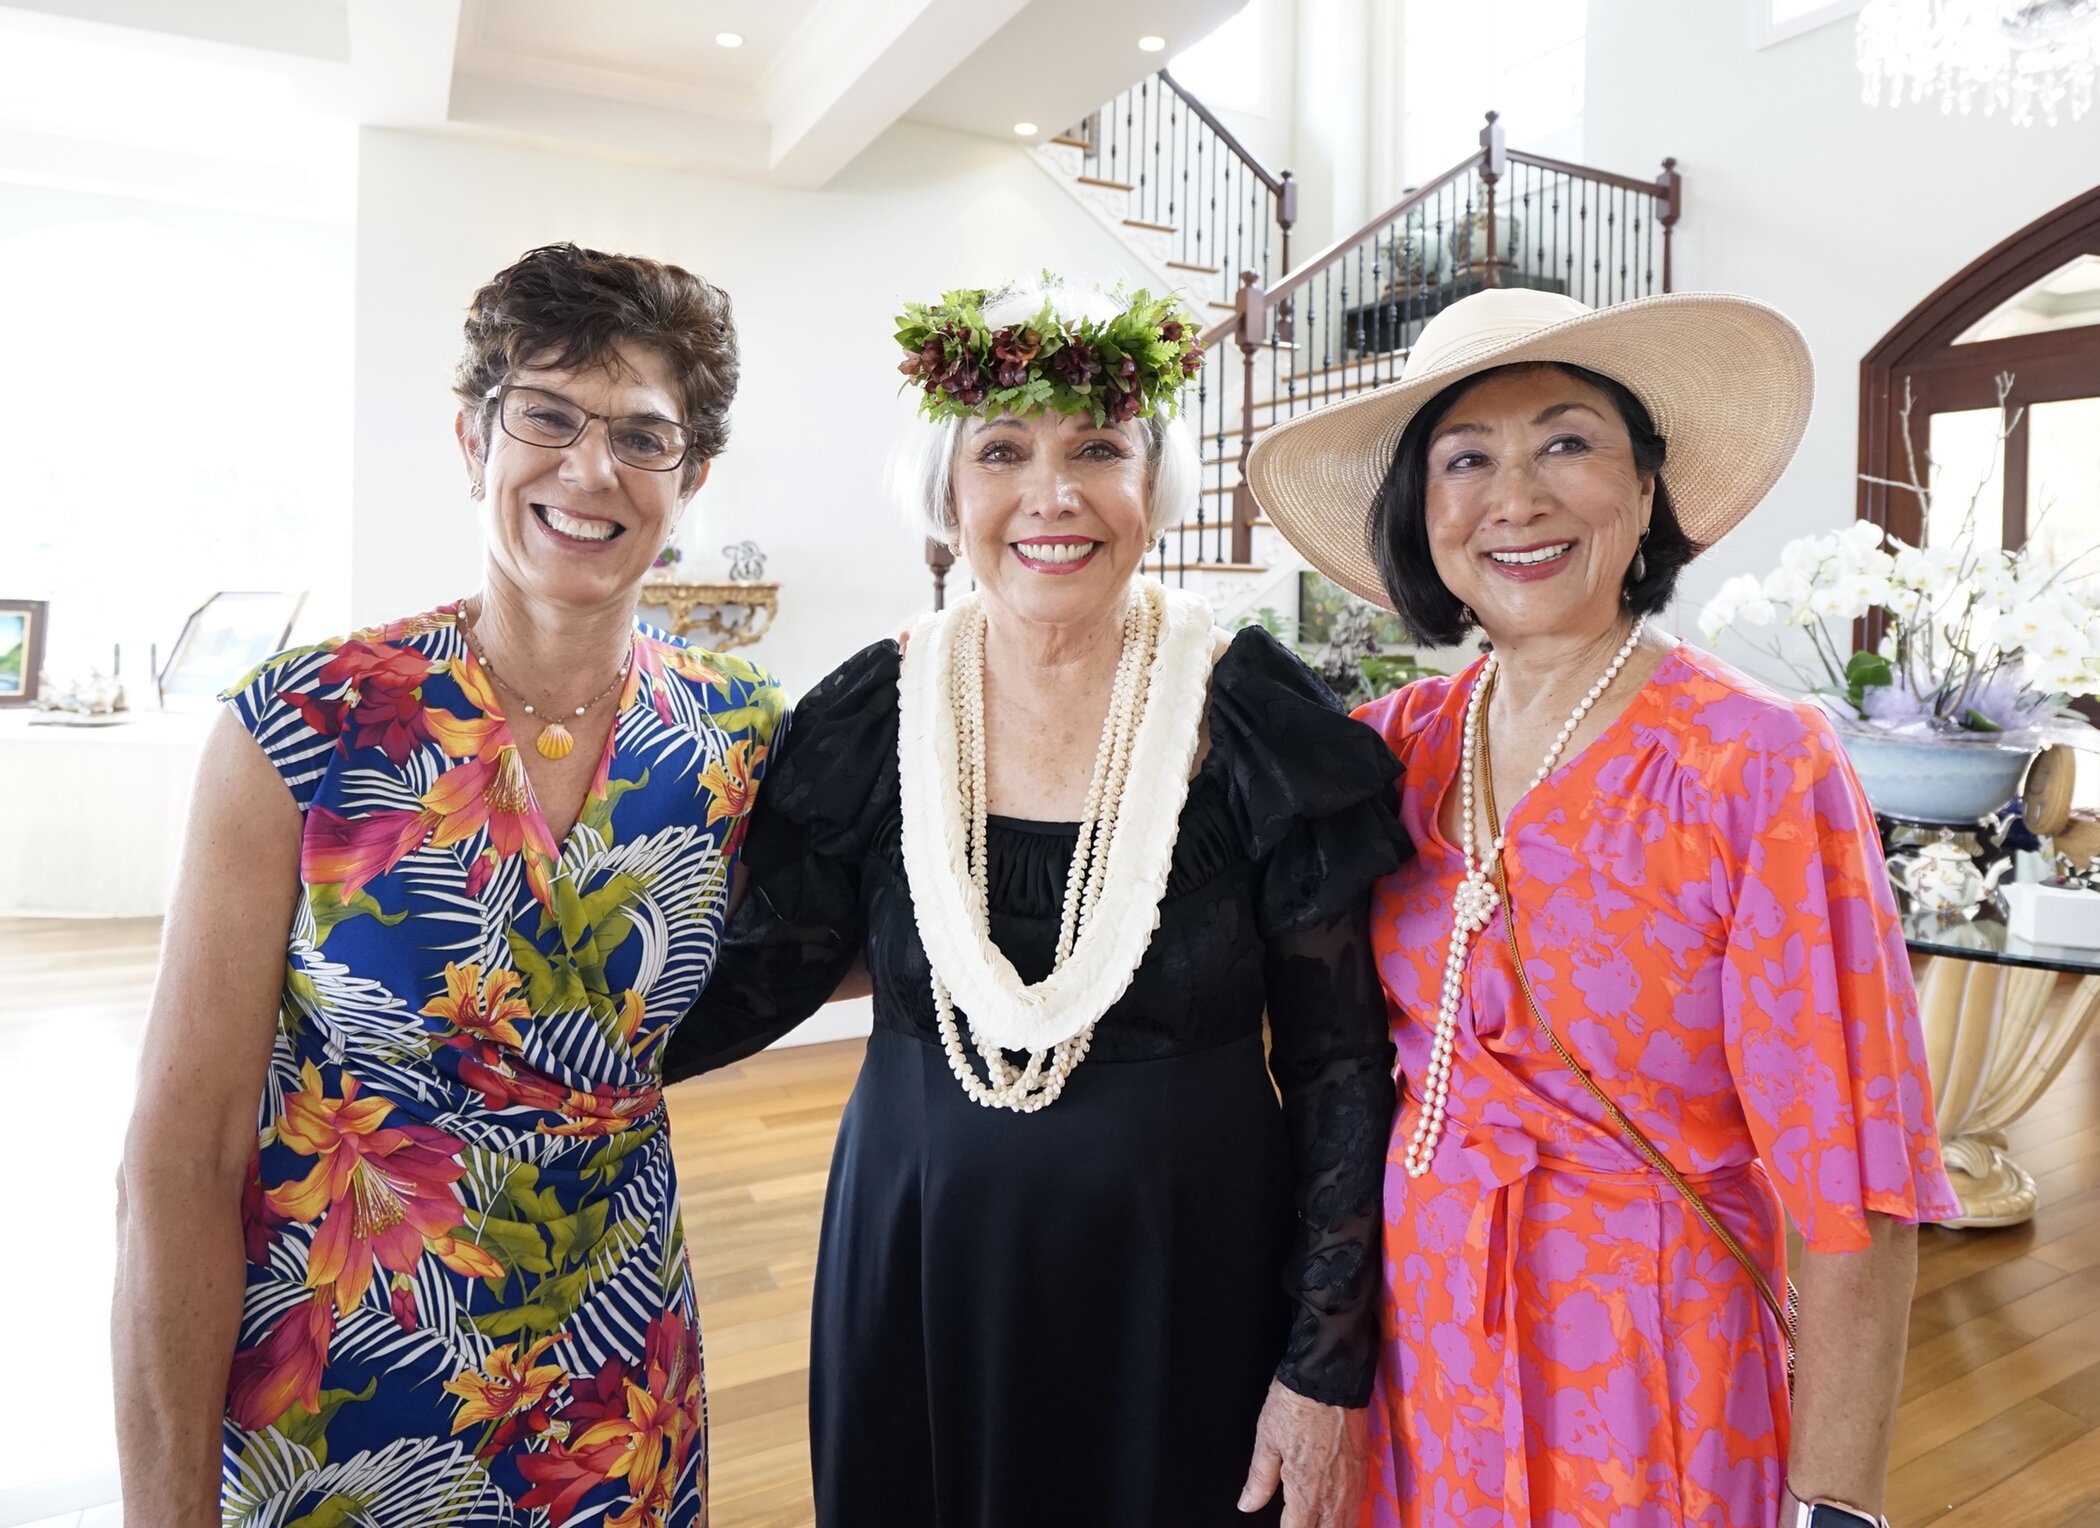  Pictured from left: High event organizers, Leanne Pletcher (far left) and Anna Mayeda (far right) with Lona Ridge owner Leona Wilson (middle). 